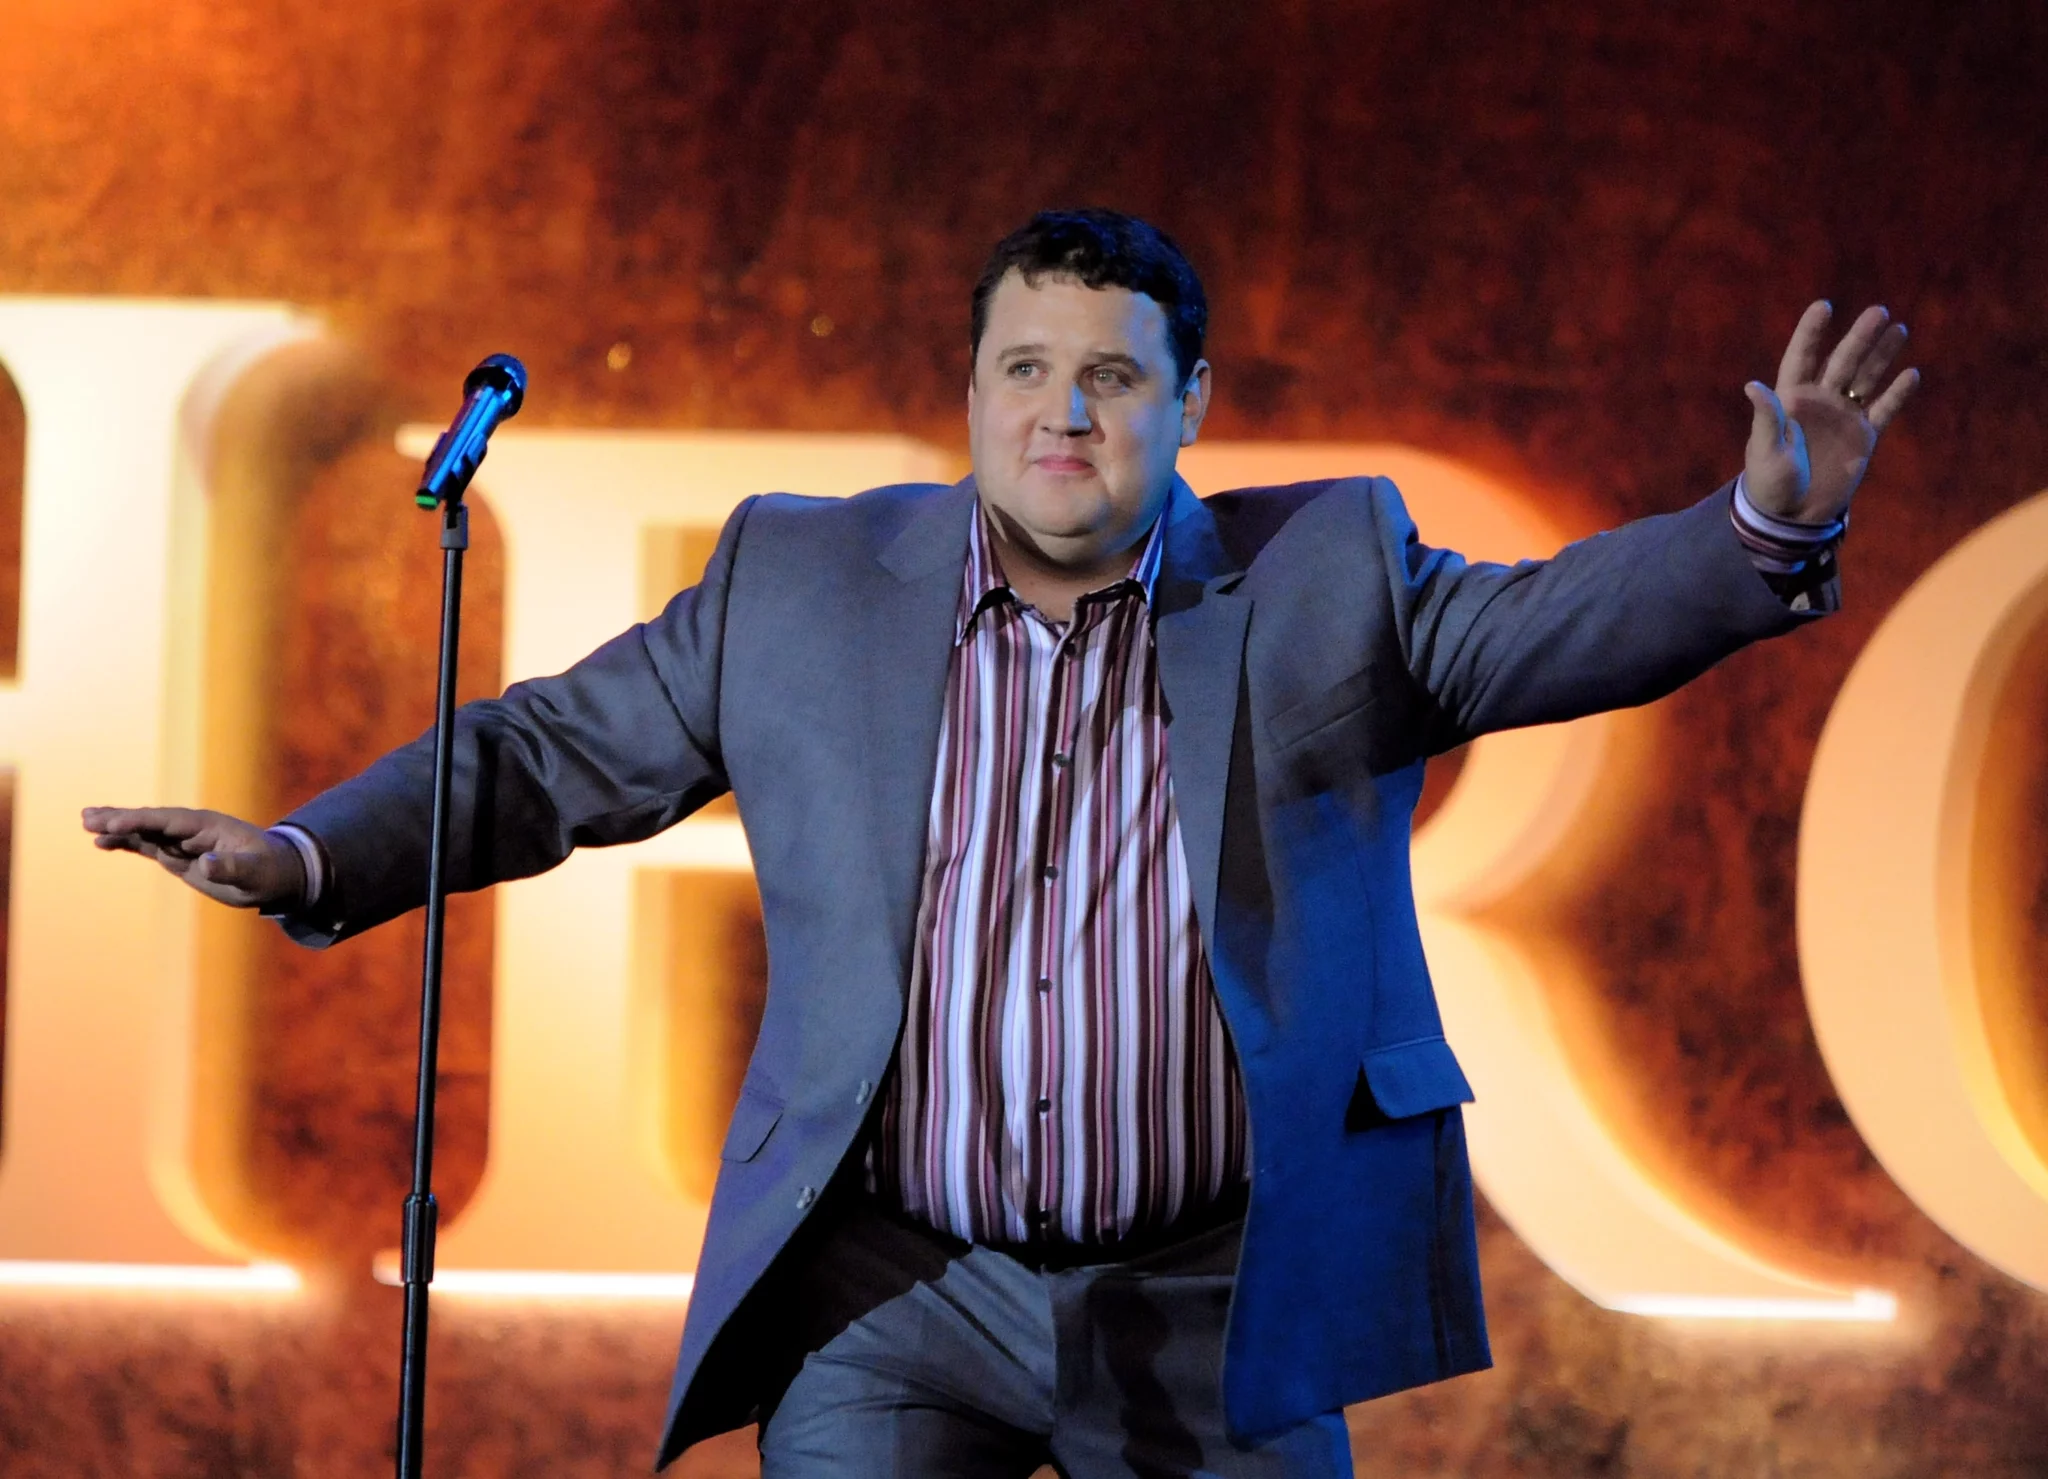 Peter Kay last section